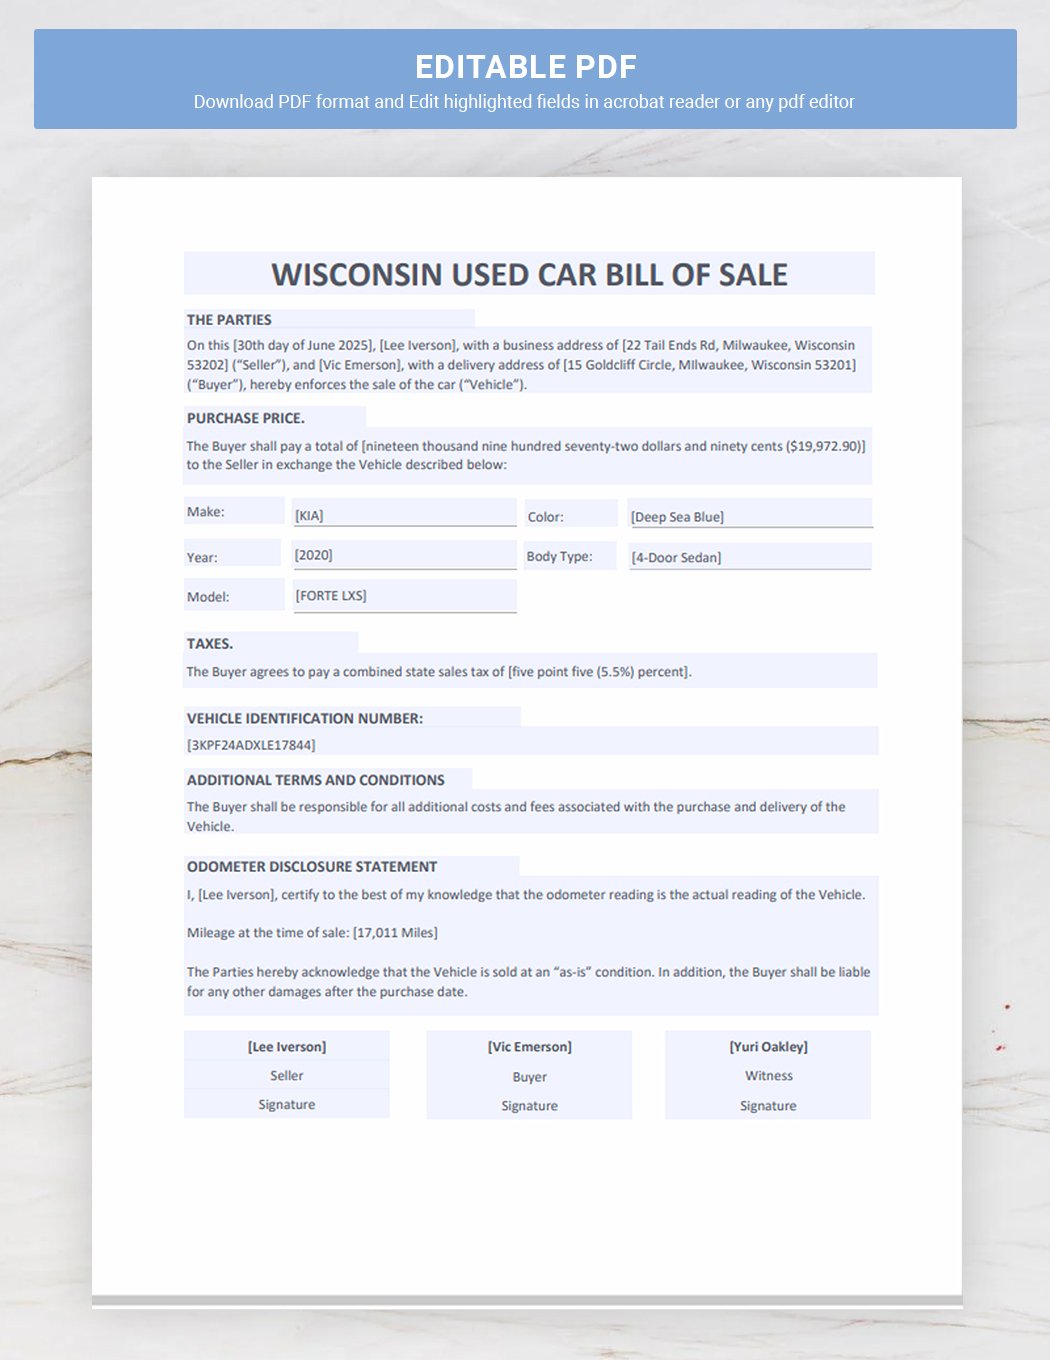 Wisconsin Used Car Bill of Sale Template